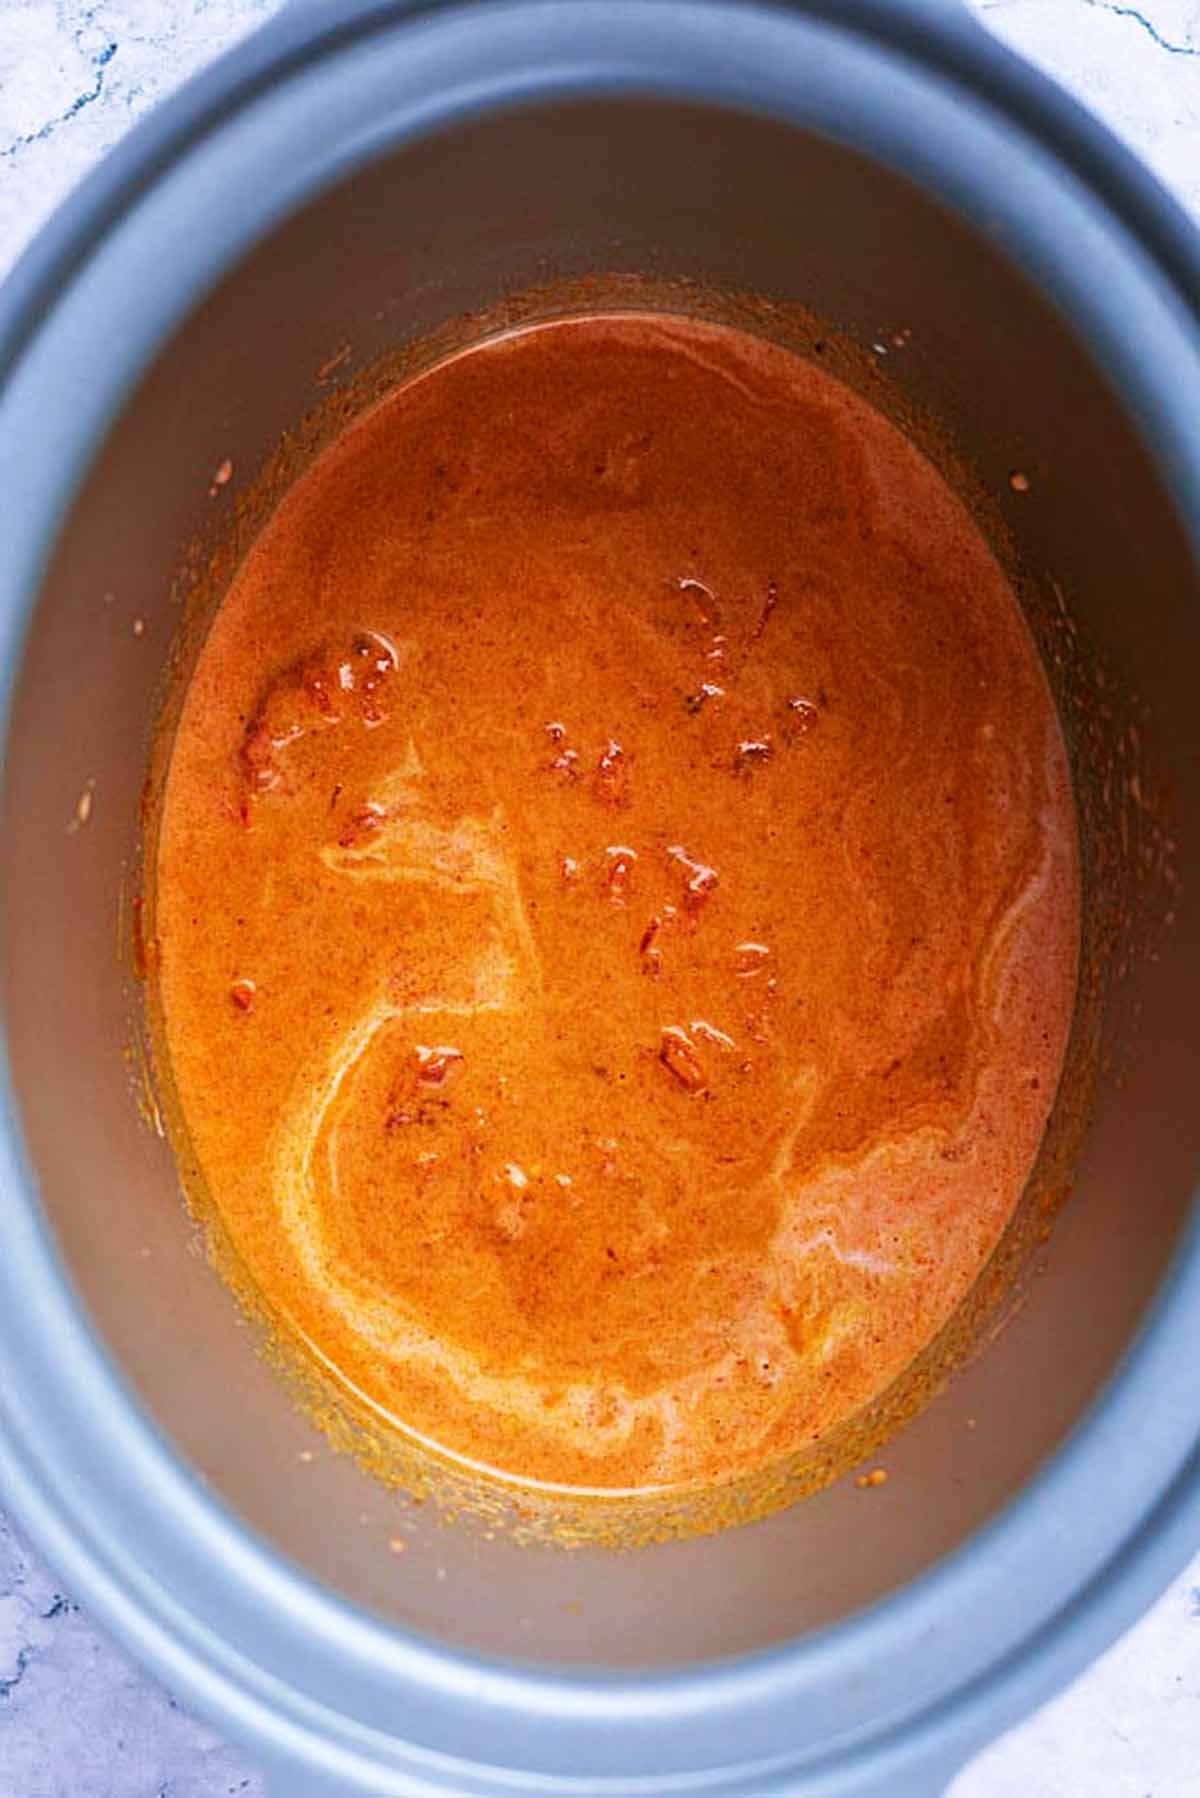 A slow cooker bowl with an uncooked curry sauce in it.